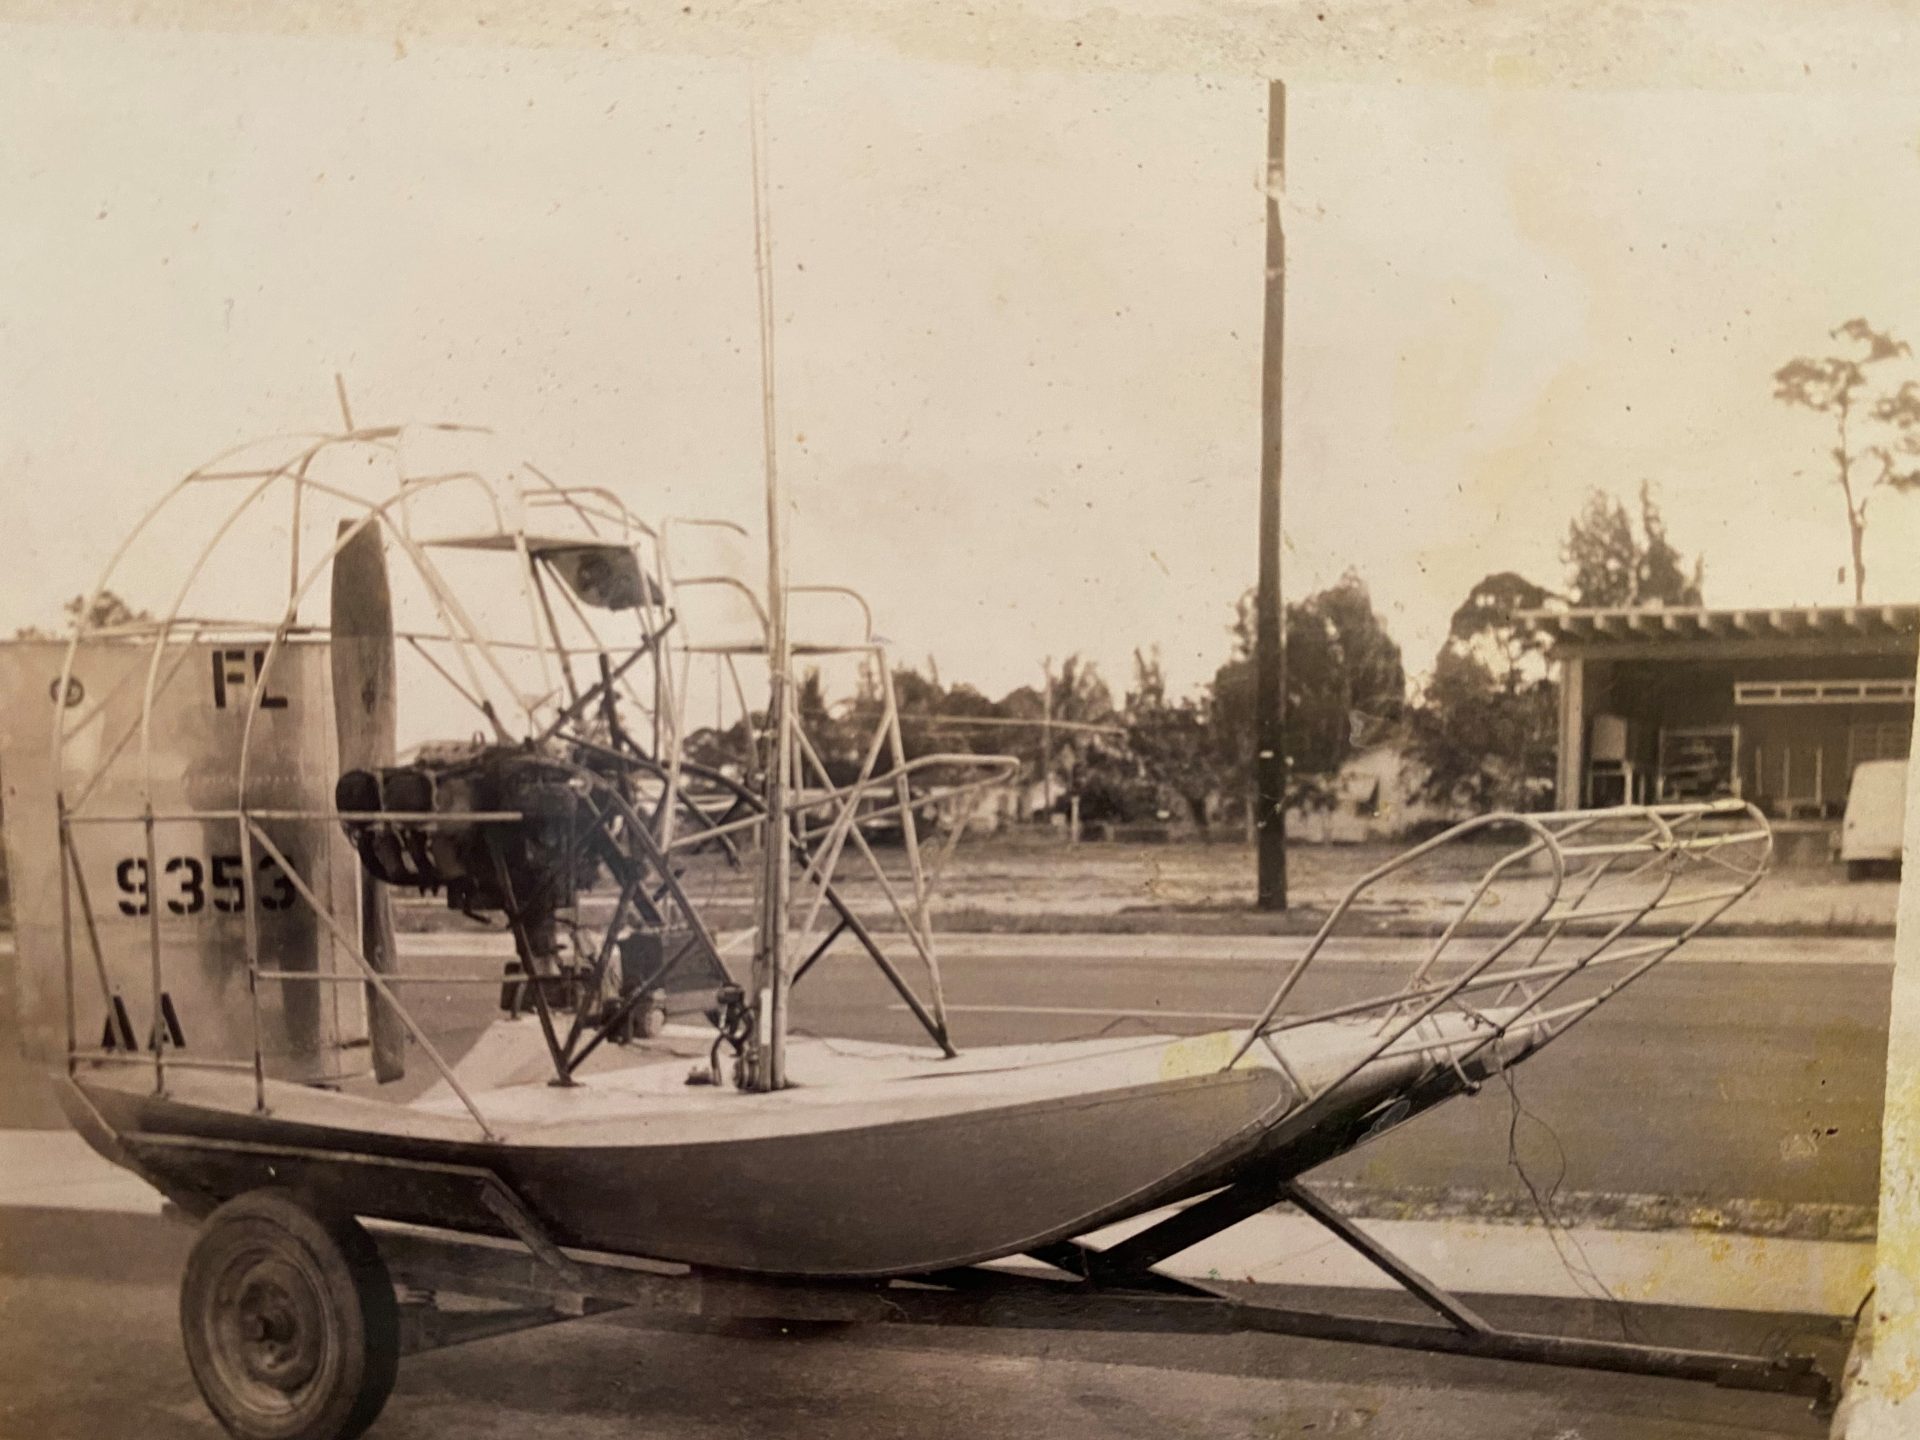 One of Bobby's early boats?